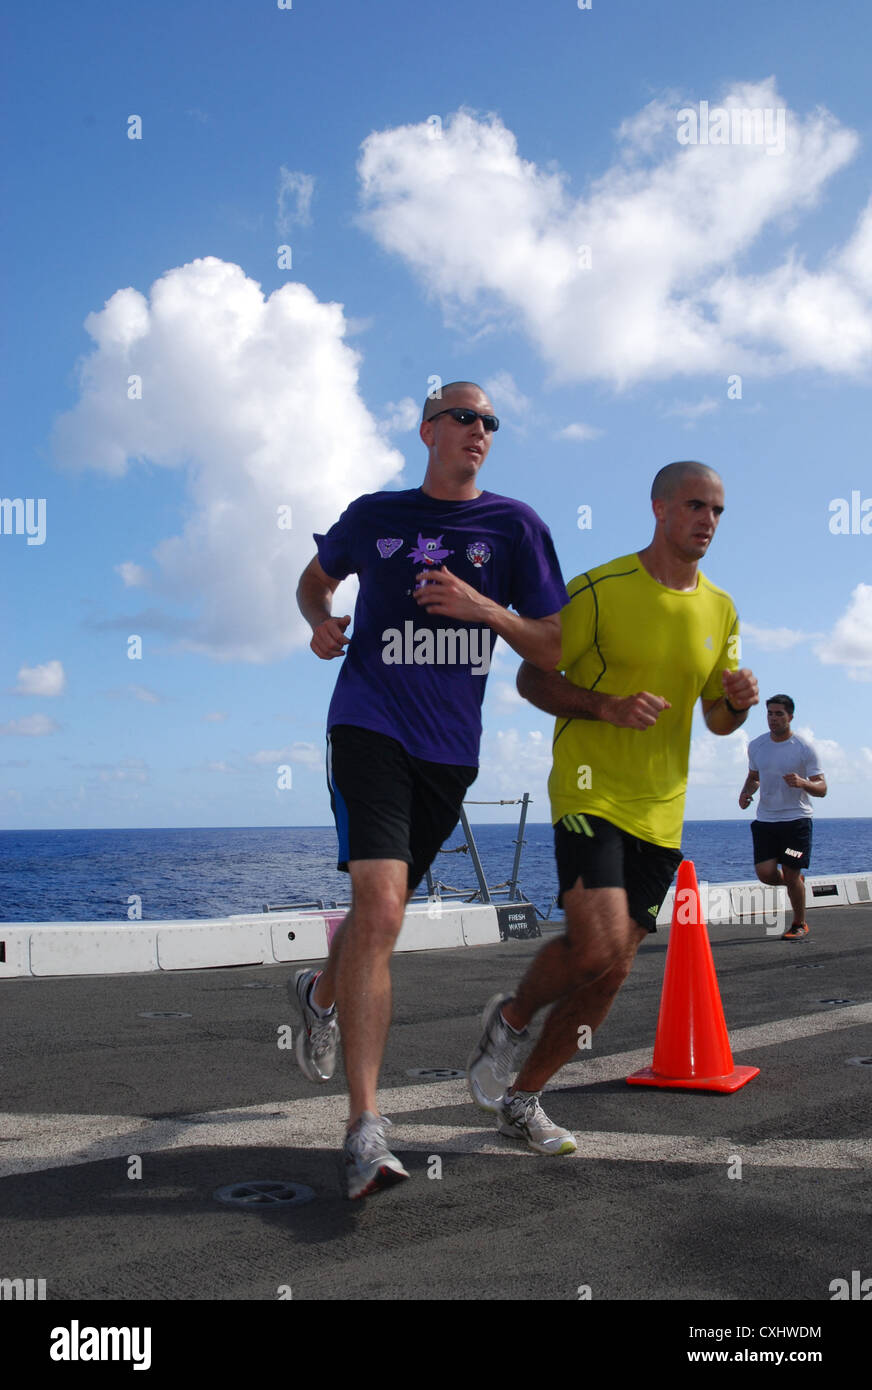 Capt. Charles Jordan and Capt. Adam Bittner round the corner during the Landaker 5k held by the â€œPurple Foxesâ€ of Marine Medium Helicopter Squadron (HMM) 364 (REIN) aboard amphibious transport dock ship USS Green Bay (LPD 20). Green Bay is part of the Peleliu Amphibious Ready Group currently underway on a Western Pacific deployment with amphibious assault ship USS Peleliu (LHA 5) and amphibious dock landing ship USS Rushmore (LSD 47). Stock Photo